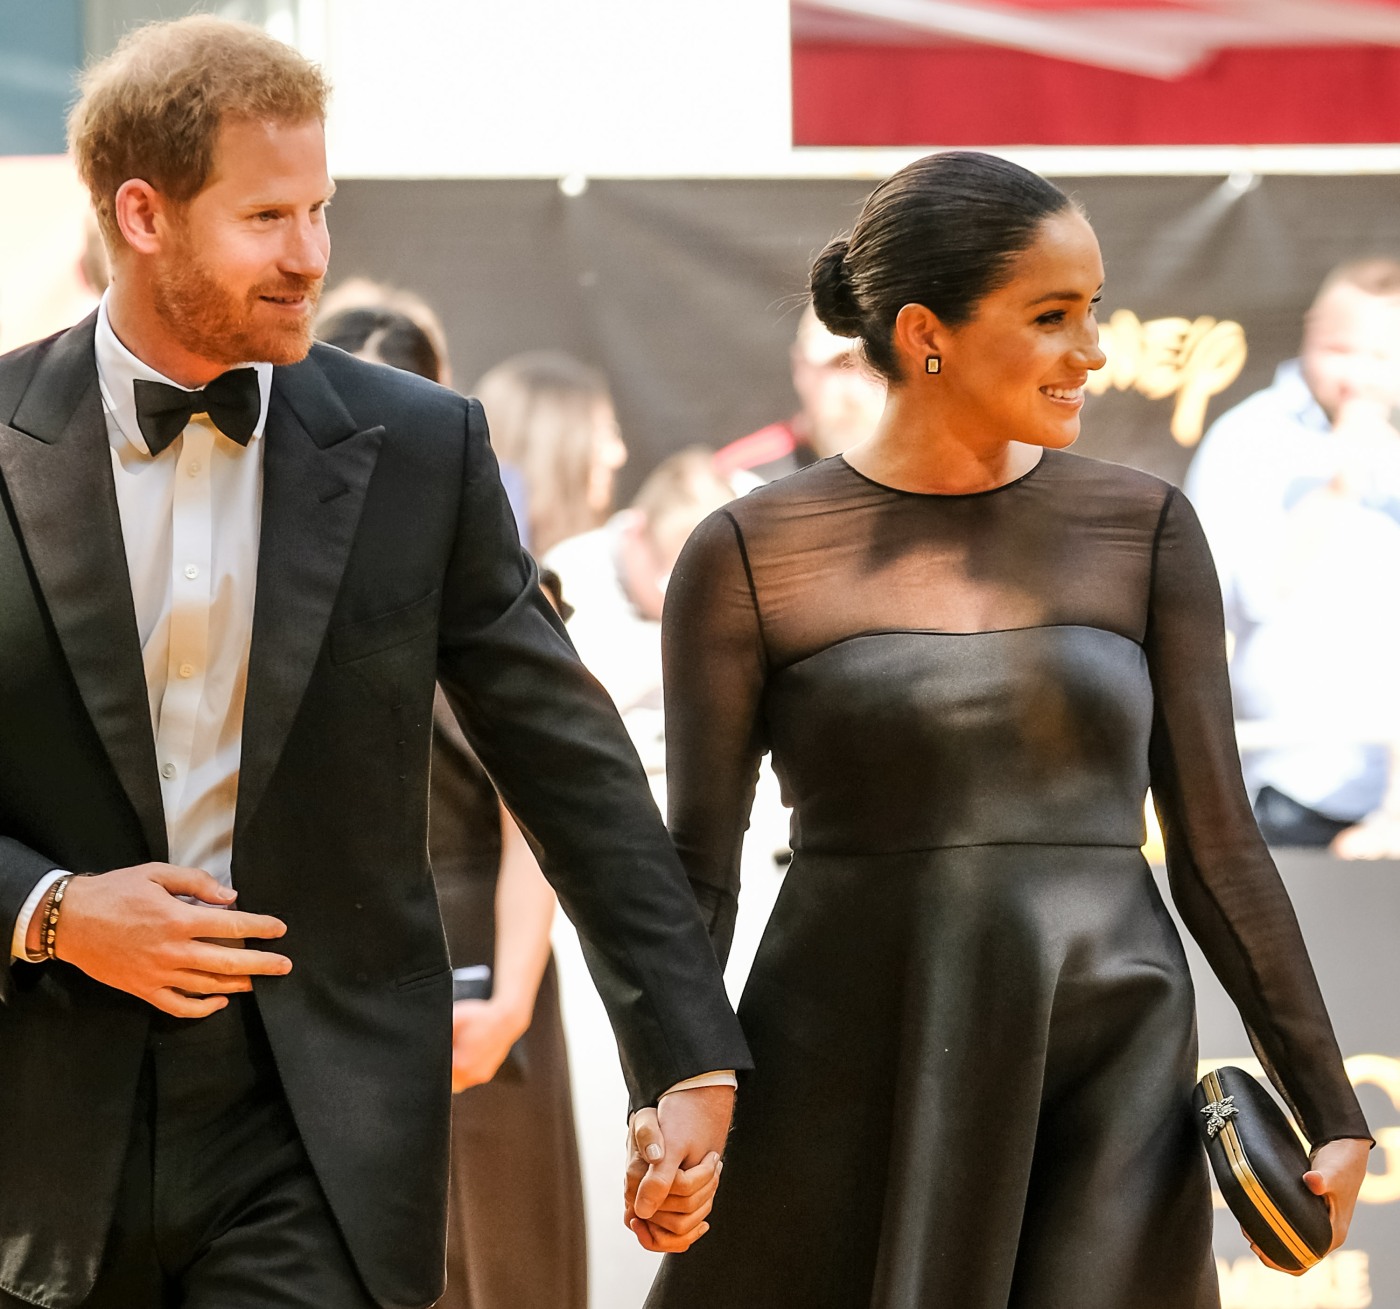 The Duke and Duchess of Sussex arrive on the yellow carpet at the European premiere of Disneys "The Lion King" on Sunday 14 July 2019